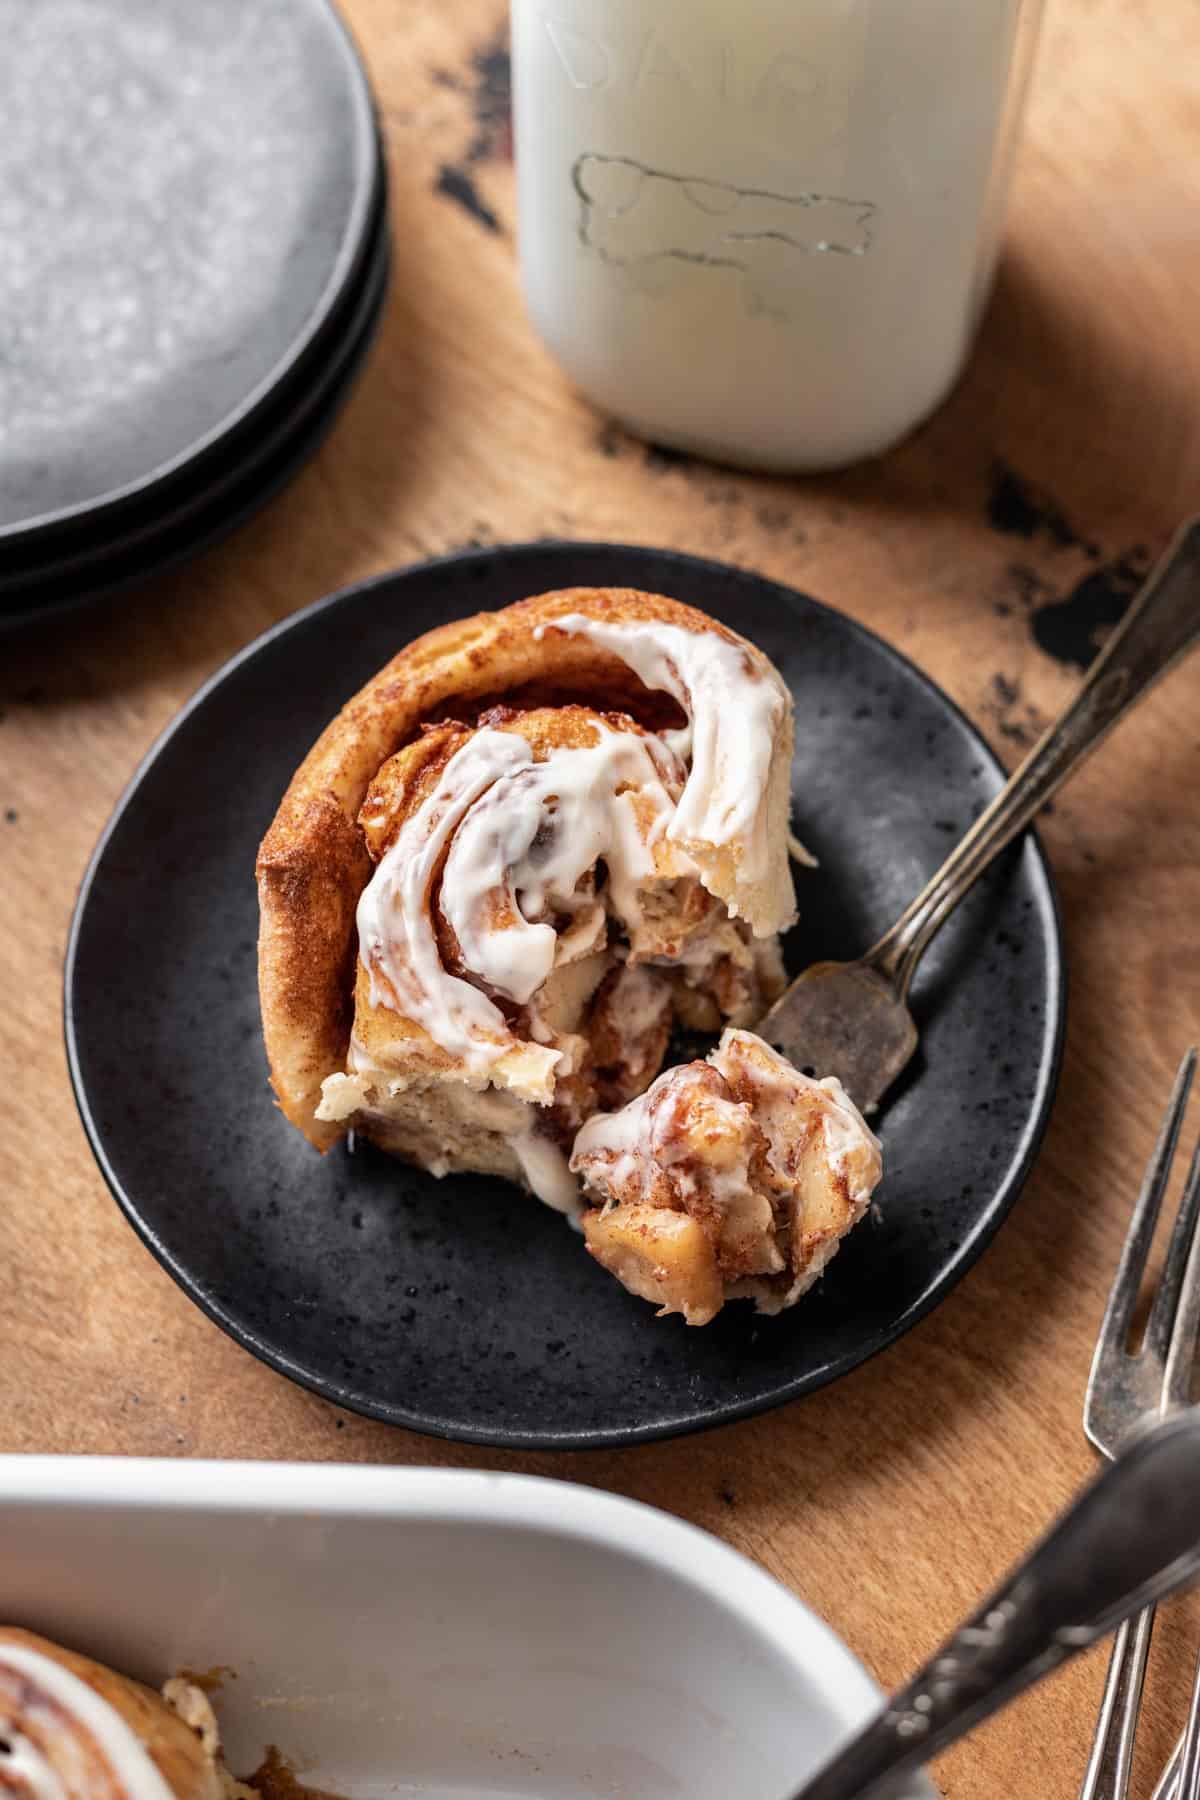 A cinnamon roll on a black plate with a fork full of apple pie filling and flakey dough.